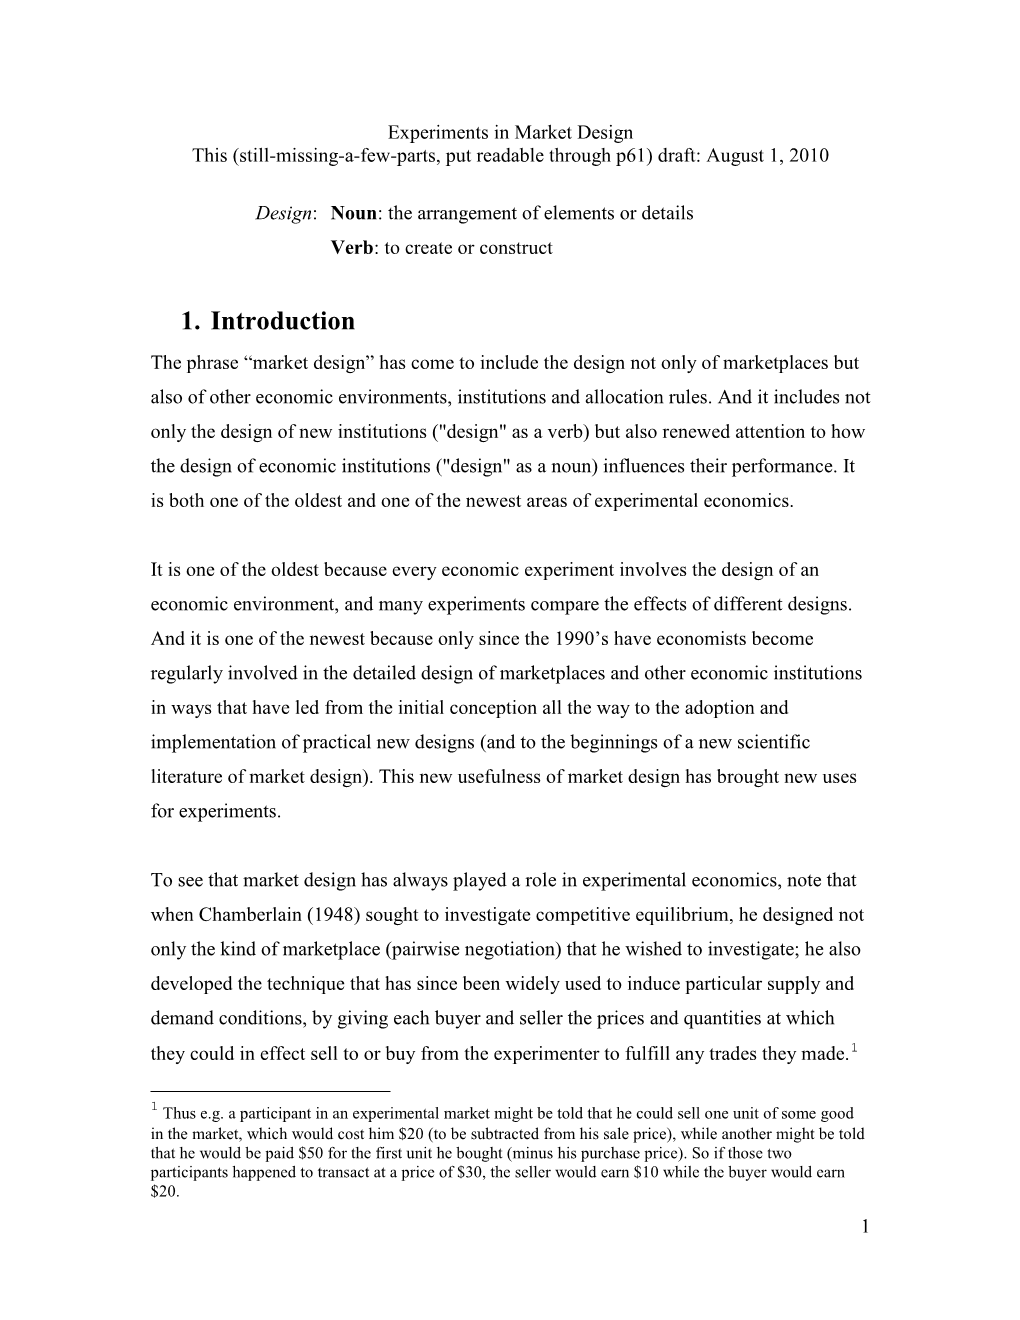 Experiments in Market Design This (Still-Missing-A-Few-Parts, Put Readable Through P61) Draft: August 1, 2010